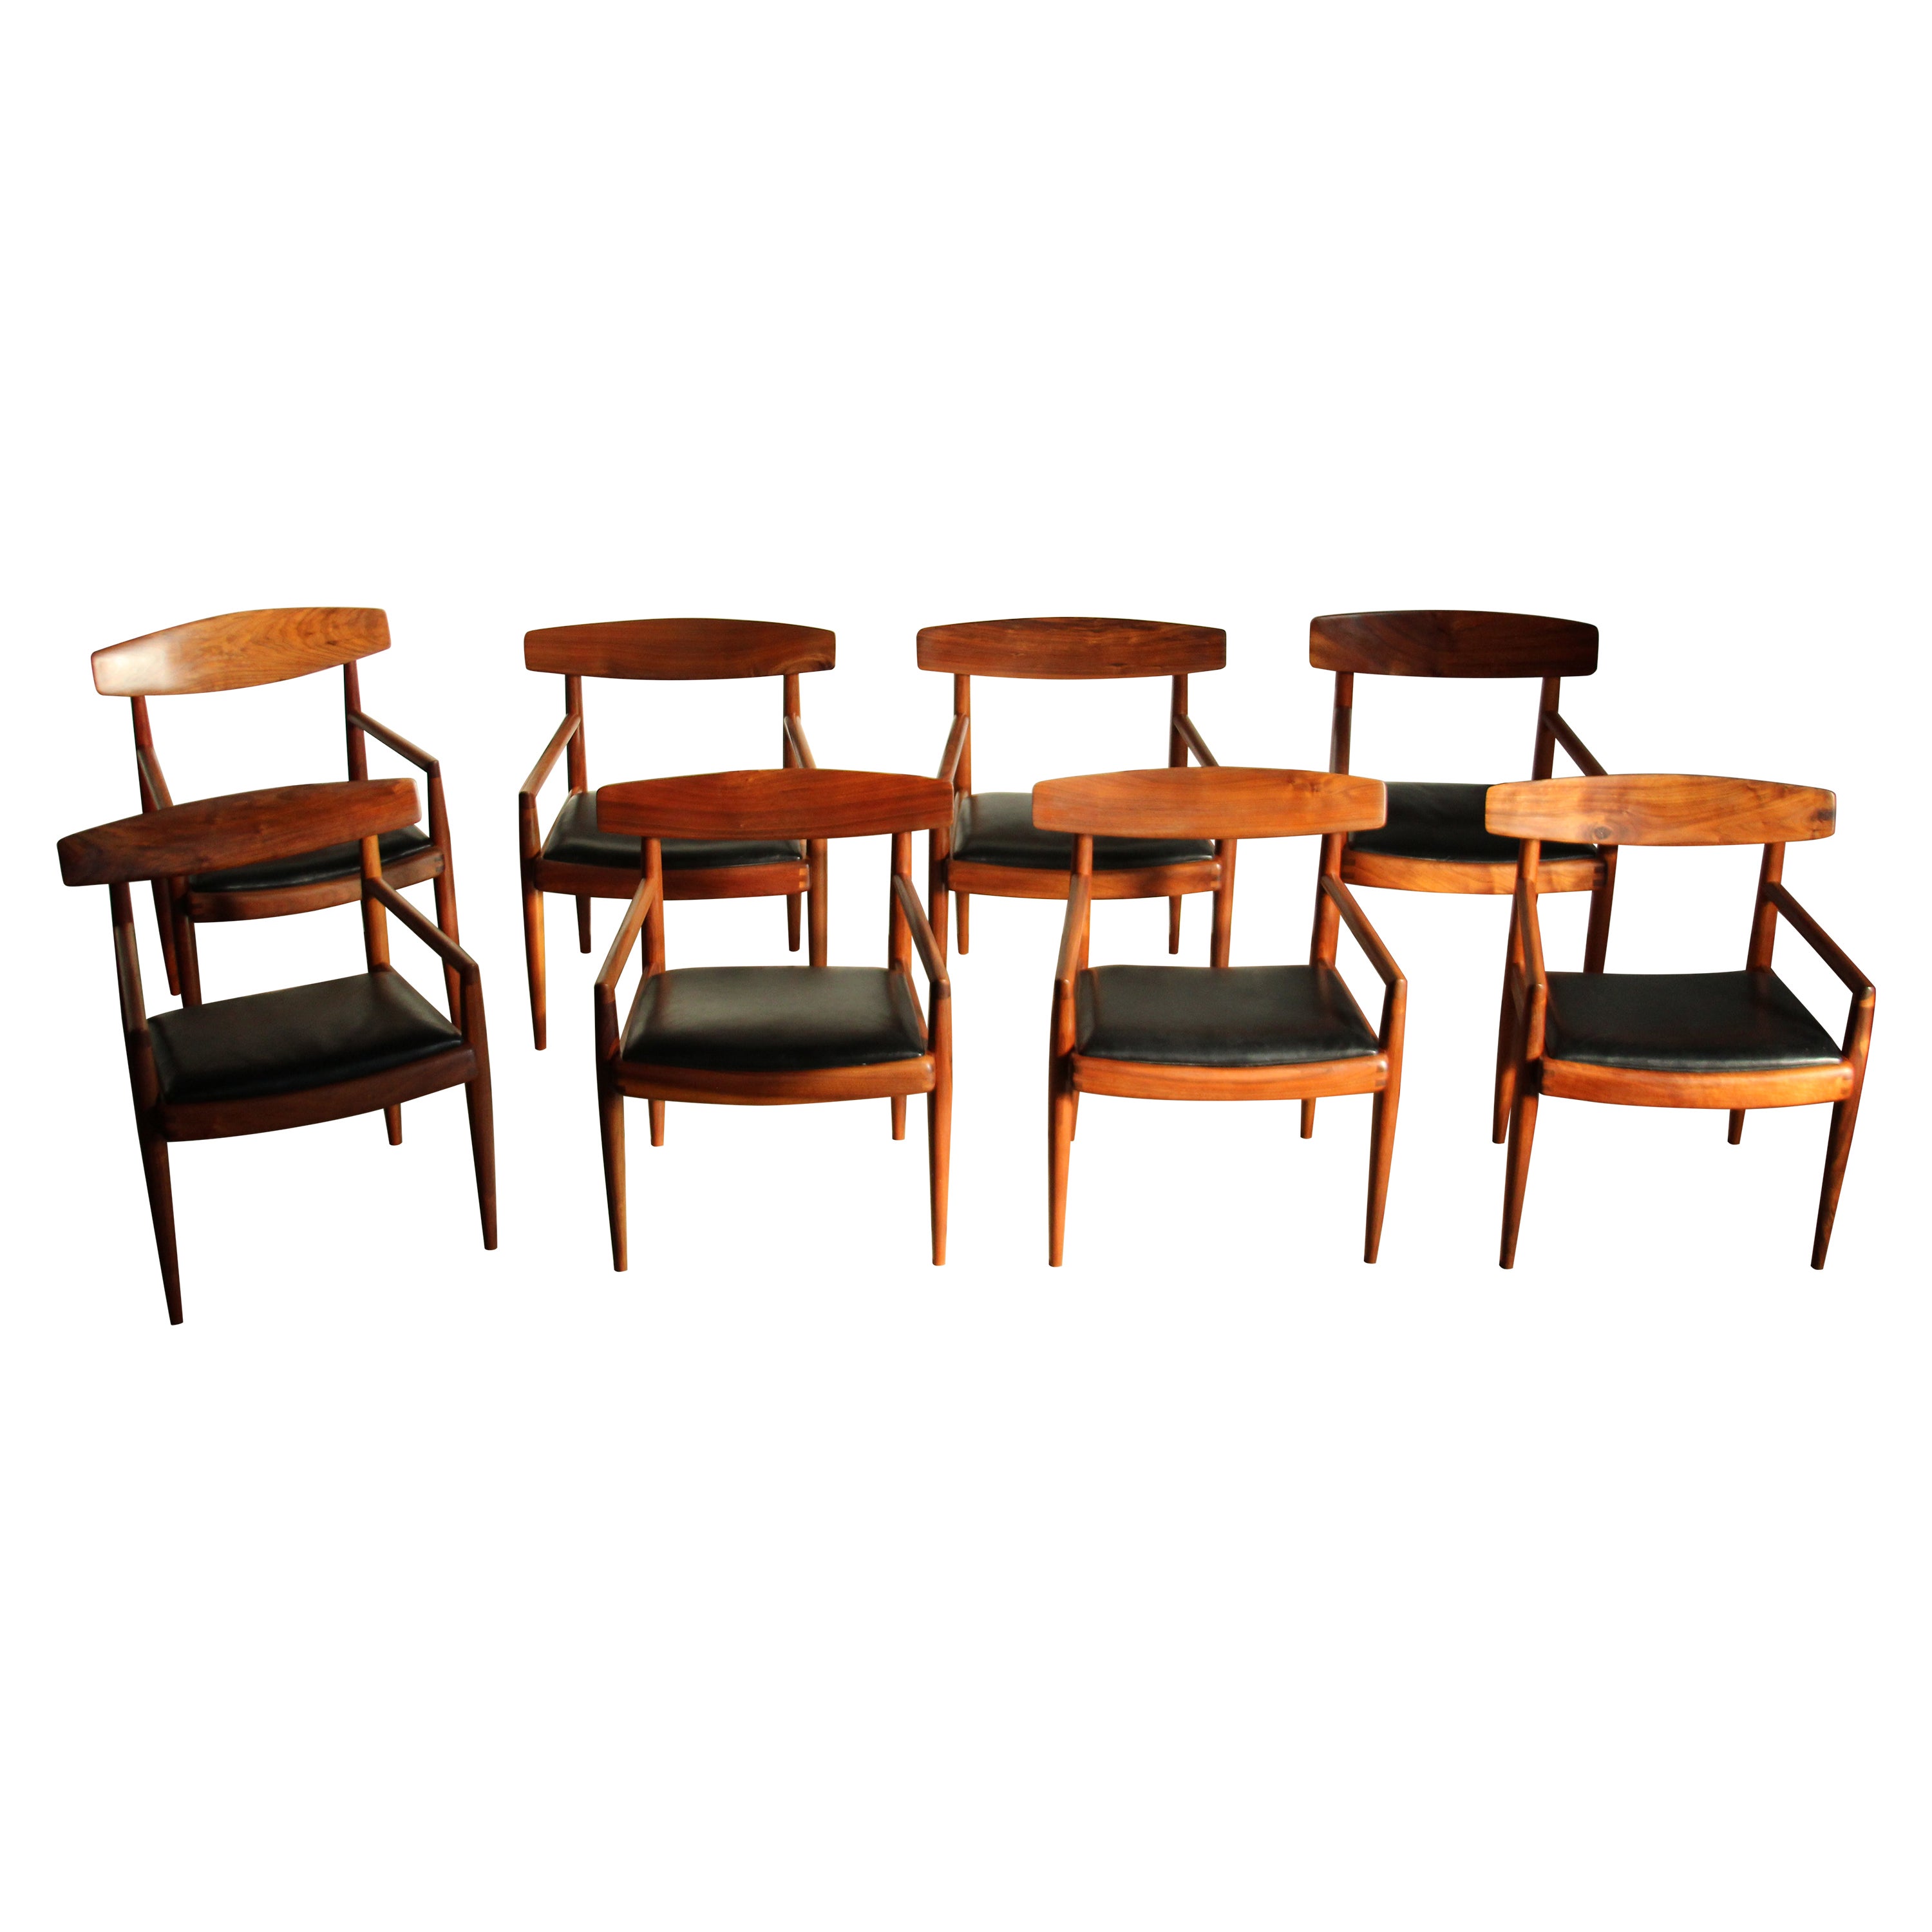 Sam Maloof Early Sculptural Claro Walnut Dining Chairs - Set of 8